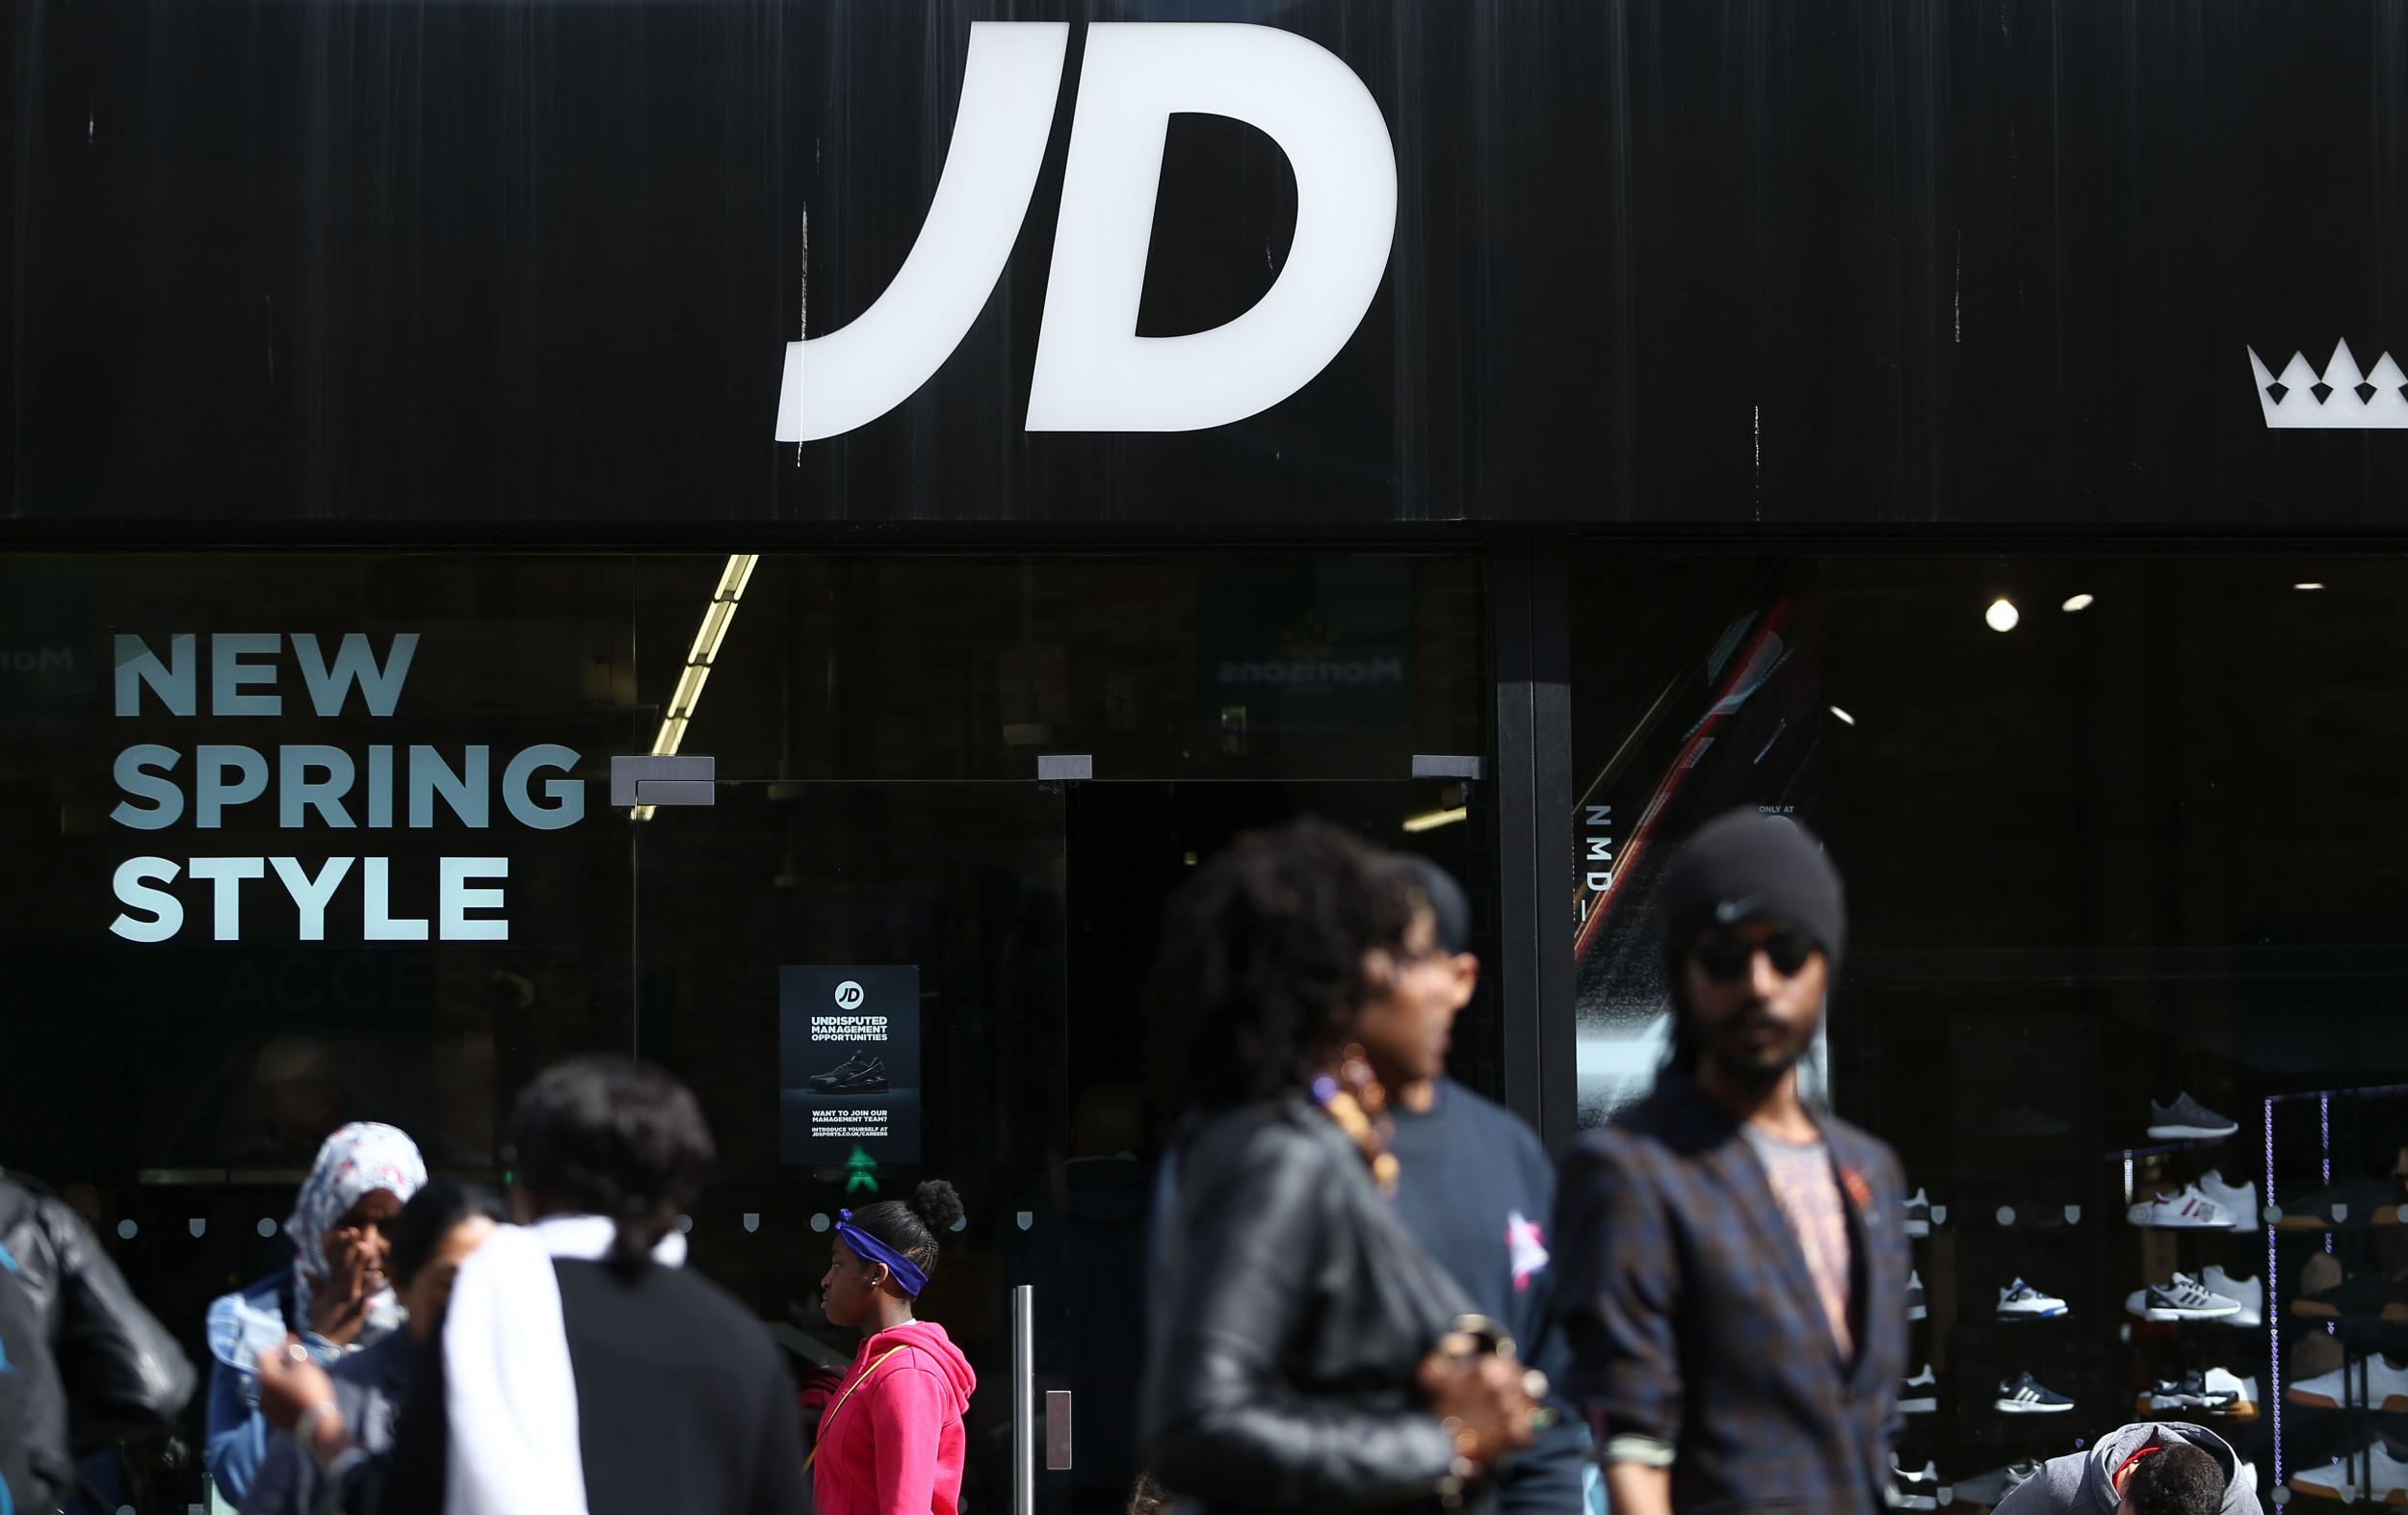 JD Sports recently reported record annual sales of £4.7bn